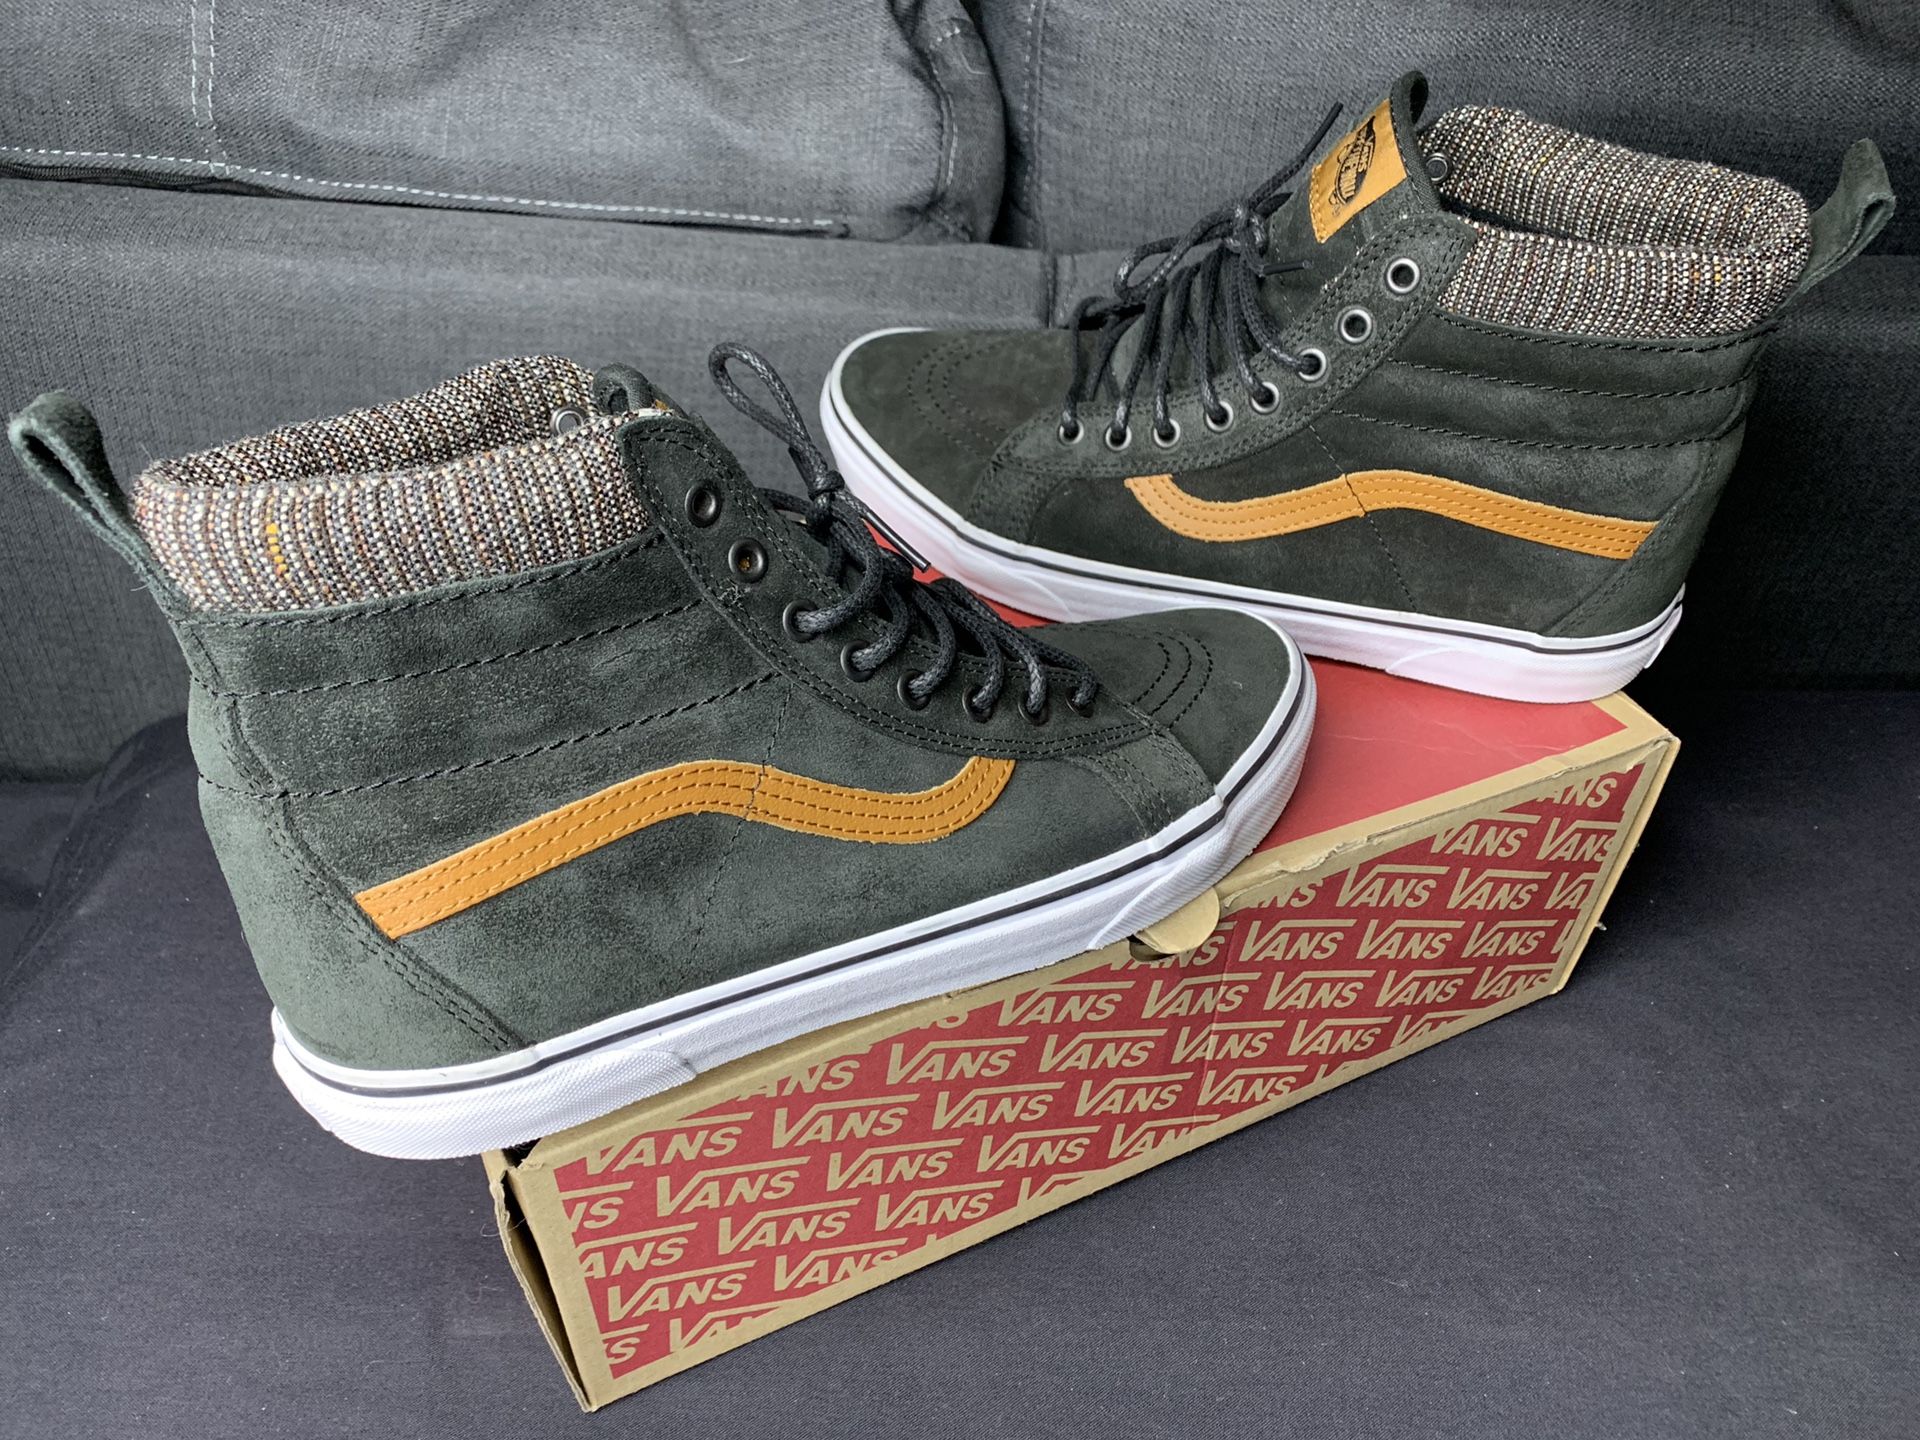 Vans Sk8-Hi Unisex Casual High-Top Skate Shoes, Comfortable and Durable. Size 11 Men/Never worn